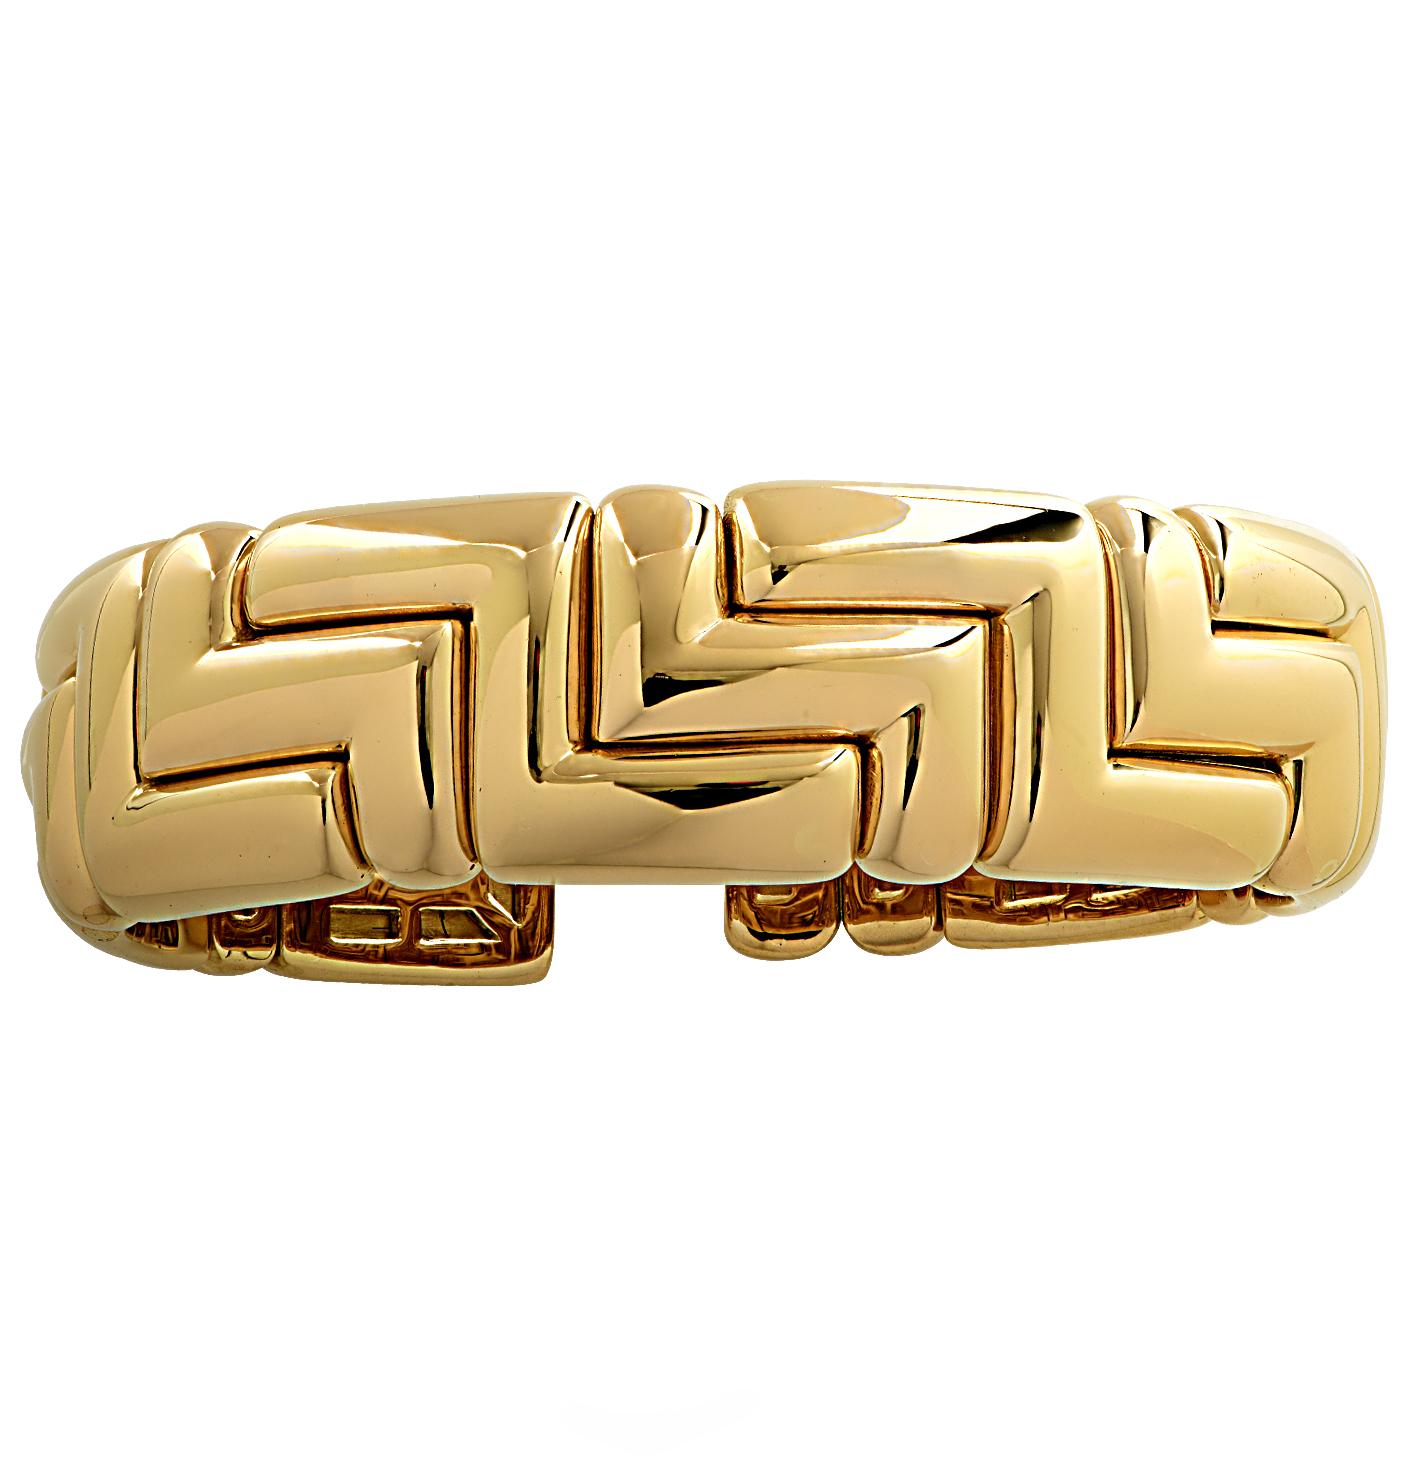 Stunning Bvlgari cuff bangle bracelet crafted in 18 karat yellow gold featuring yellow gold geometric links interlocking to create a bold and alluring design. This striking bangle cuff bracelet measures .72 of an inch in length and has an inner